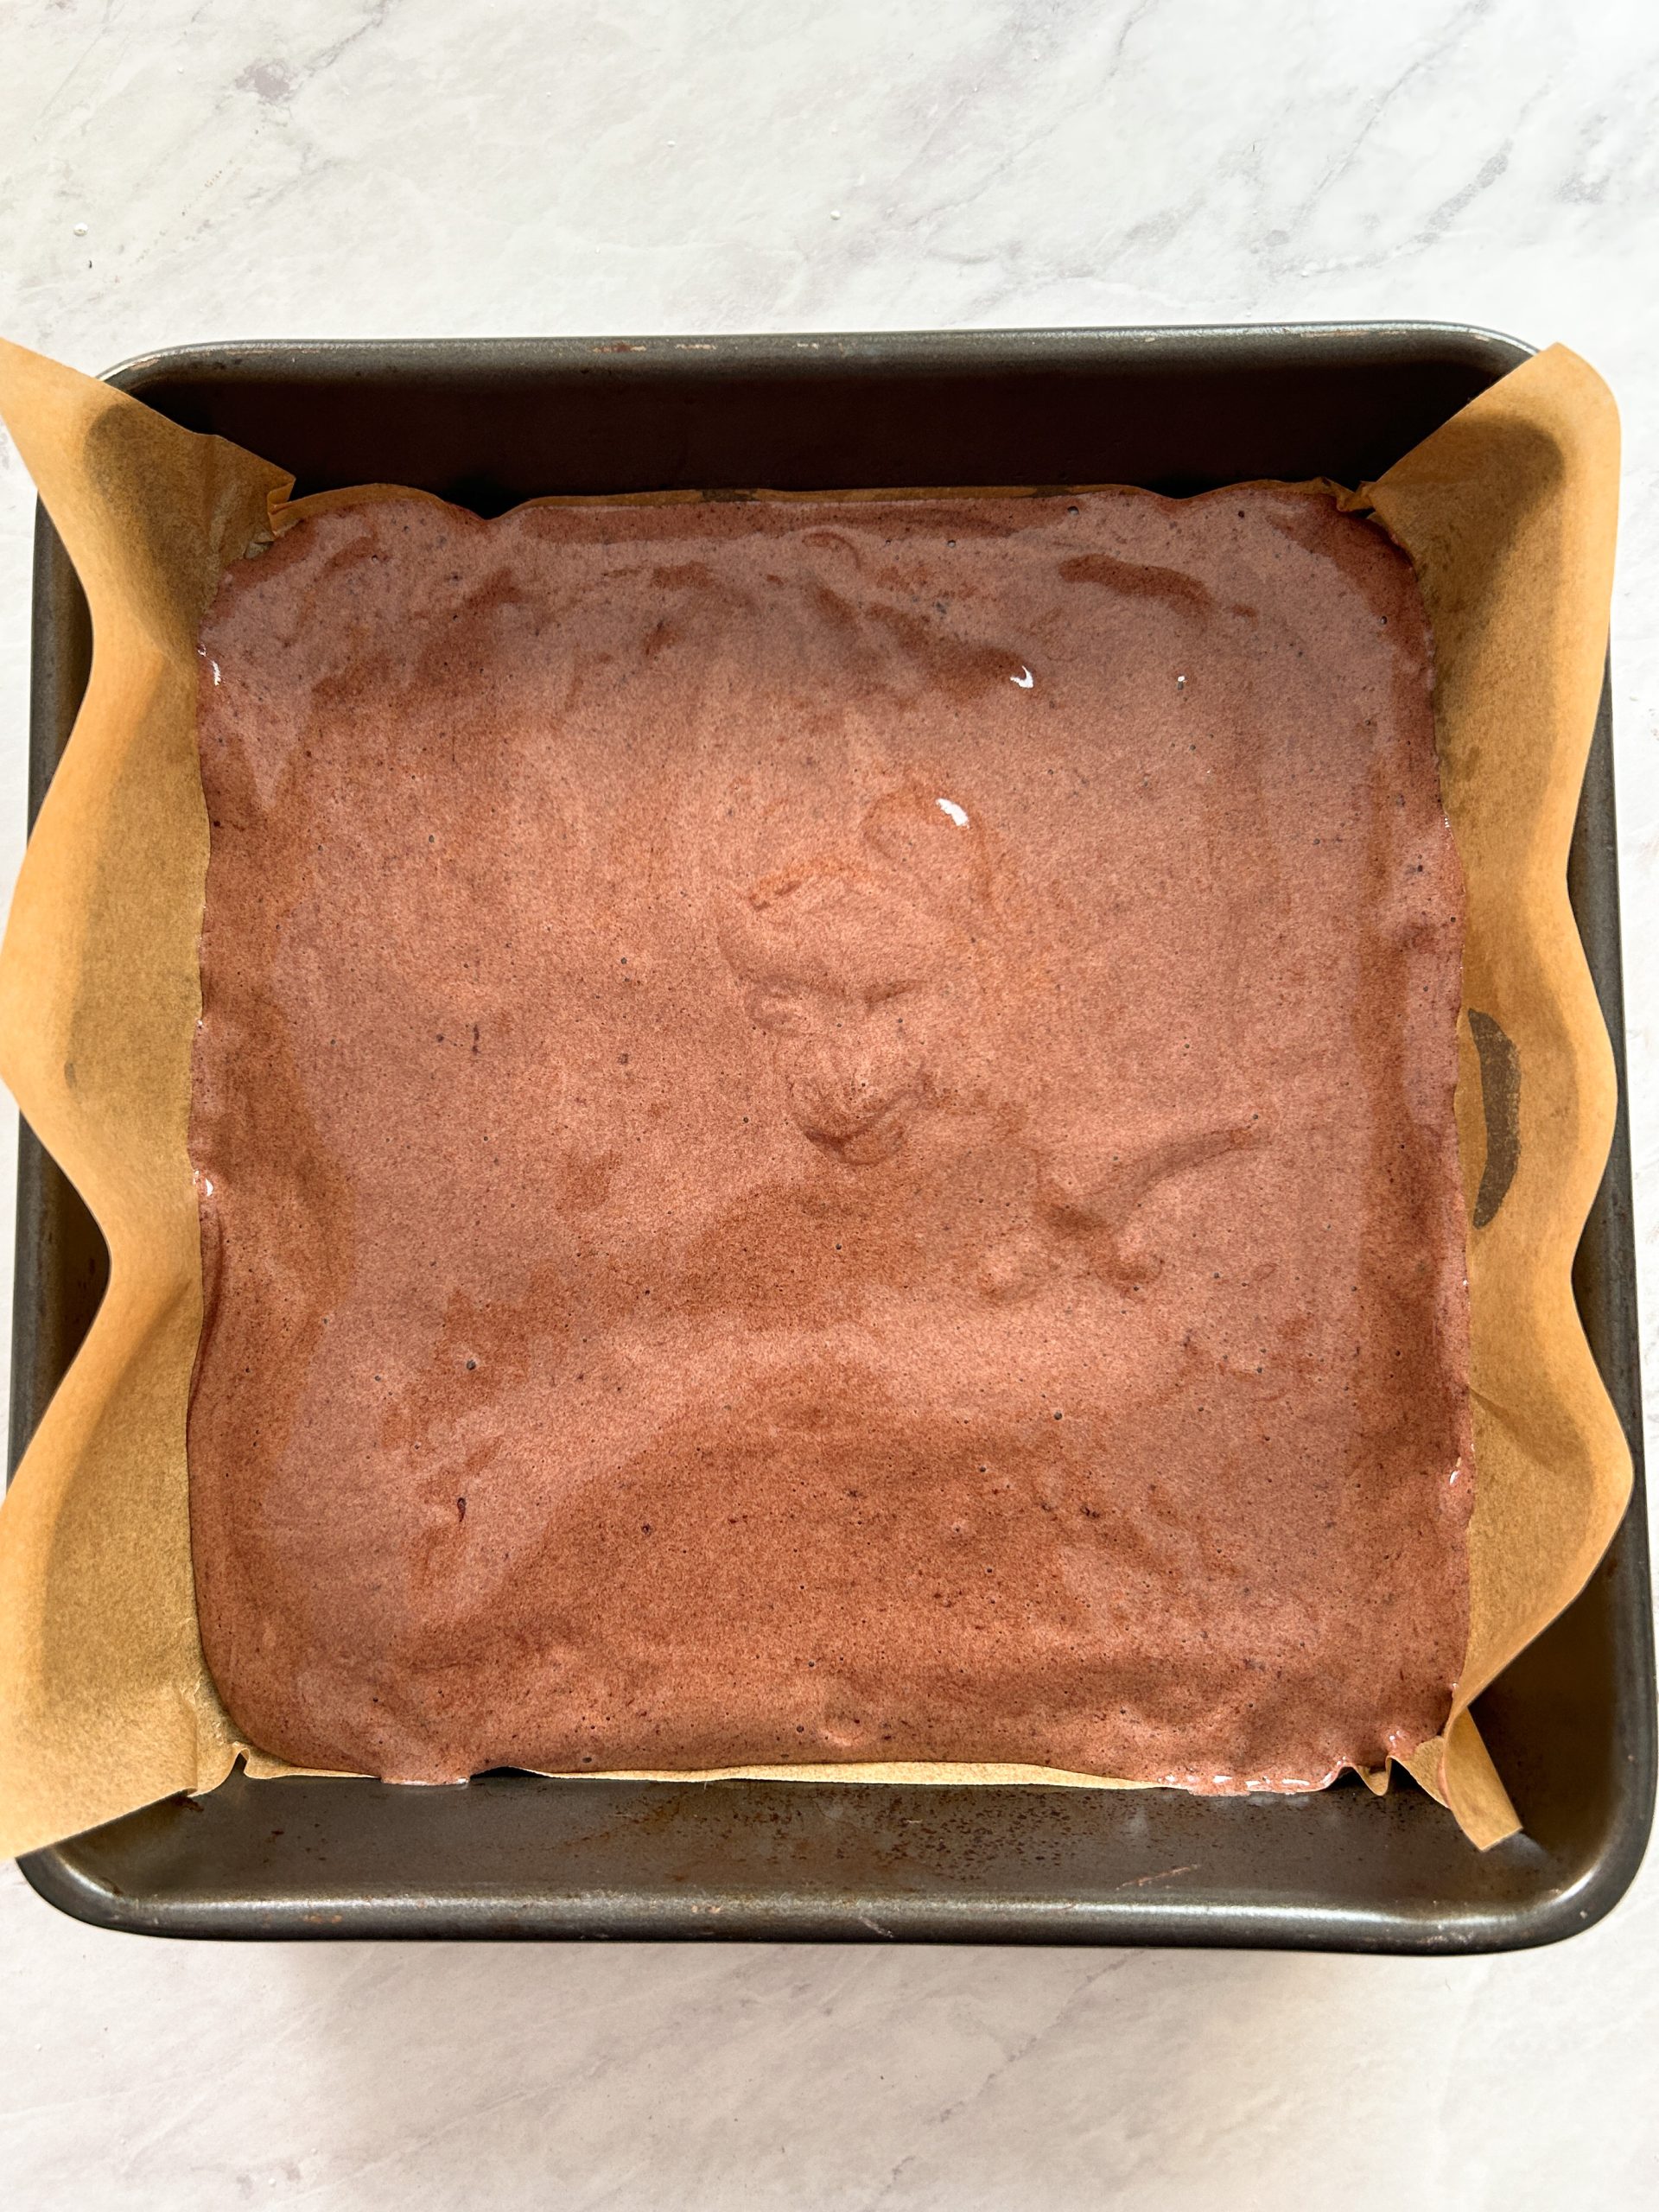 chocolate sponge cake batter in a square pan